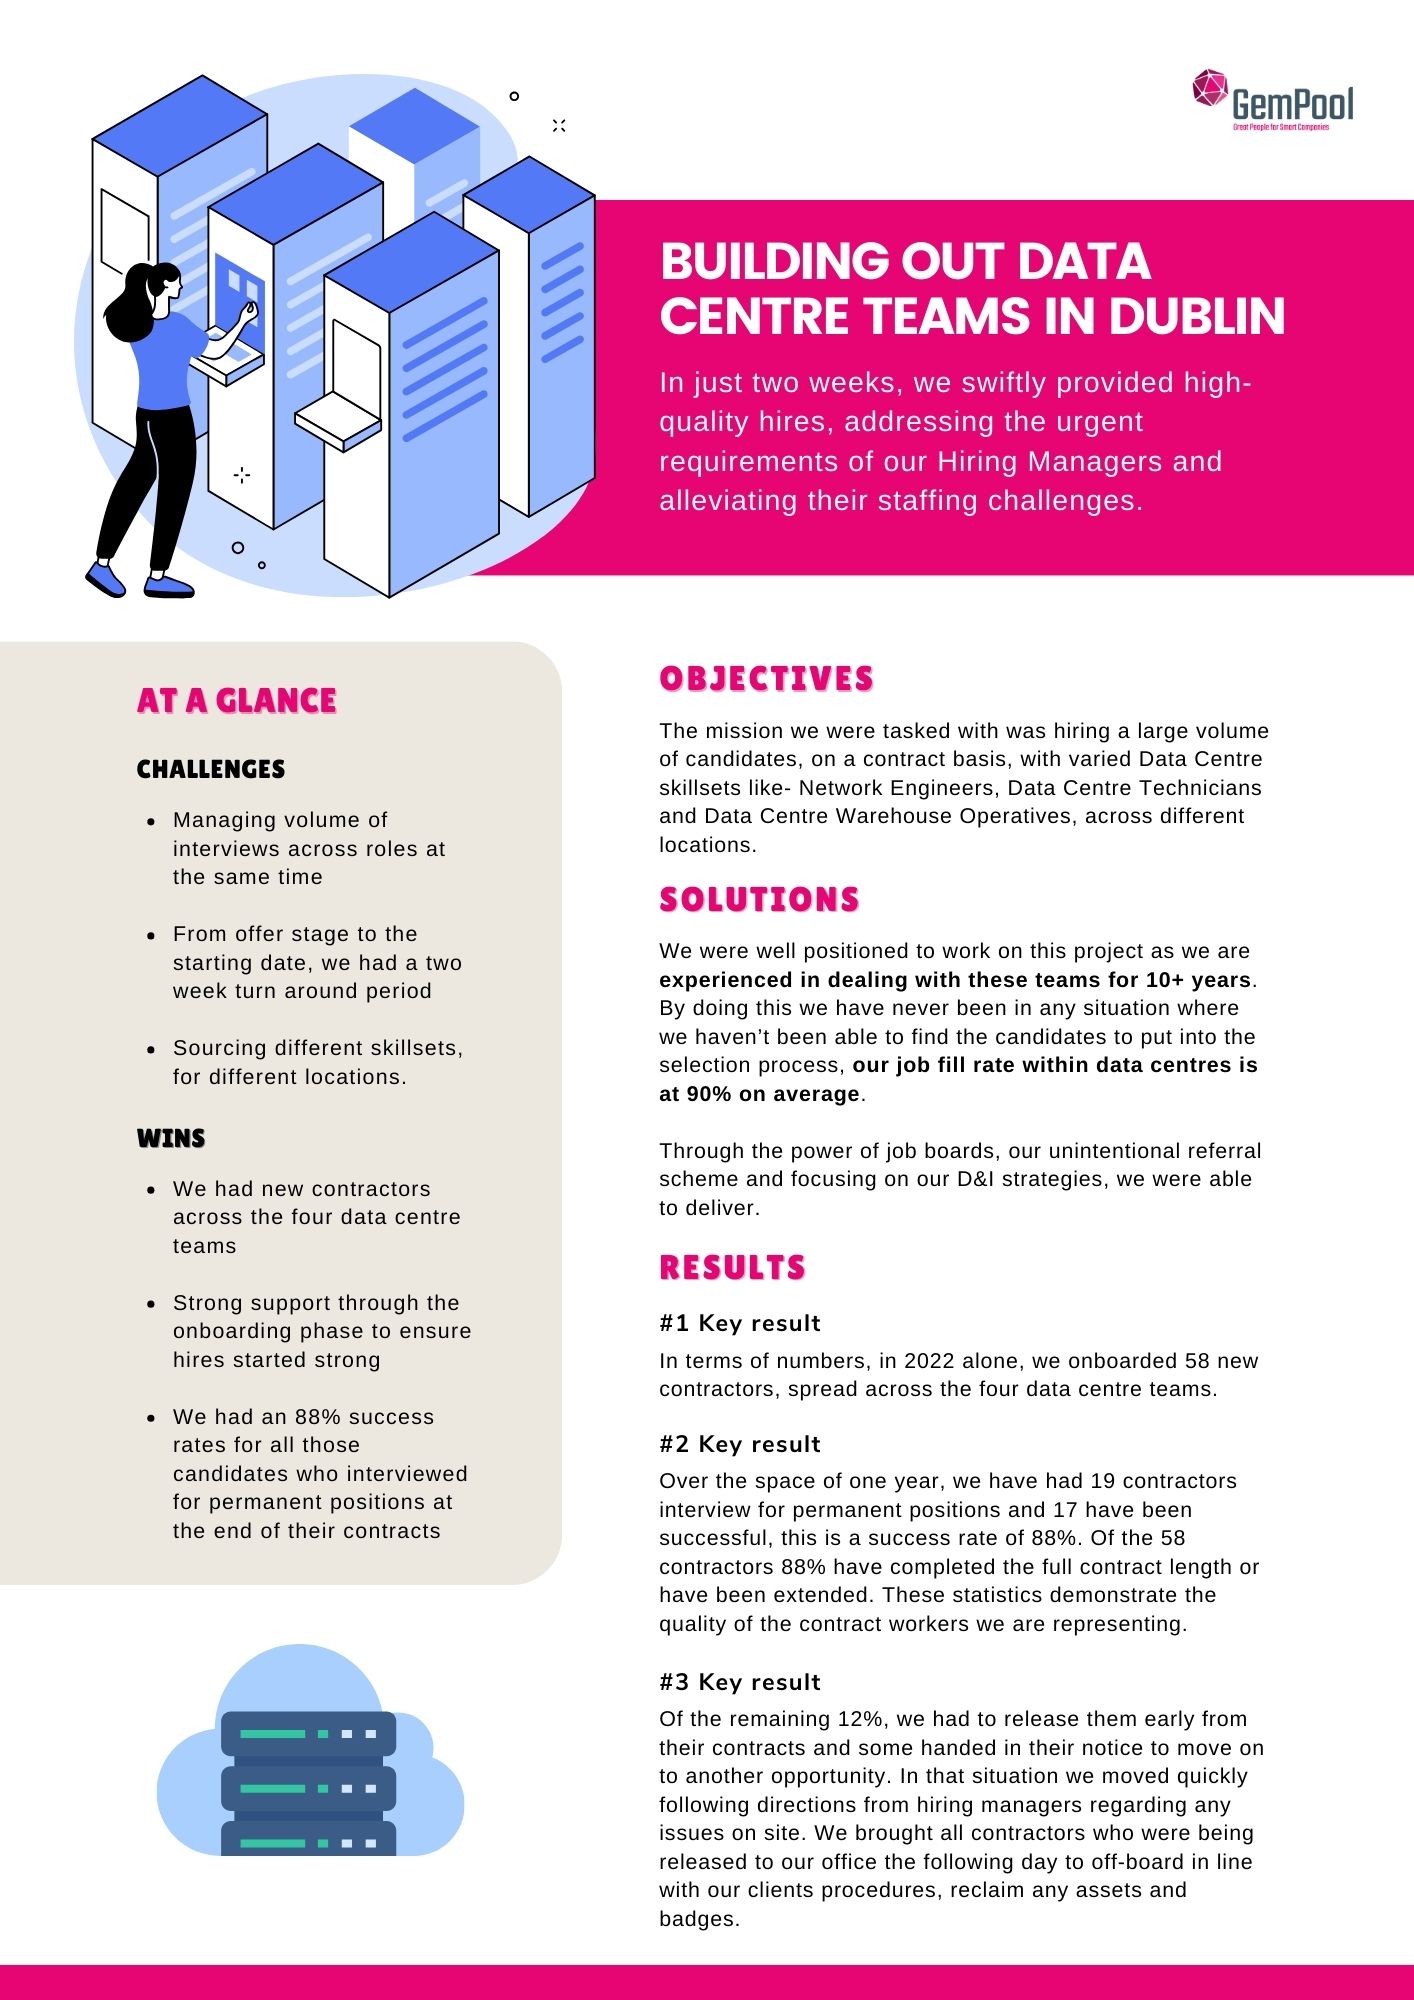 Building Out Data Centre Teams in Dublin